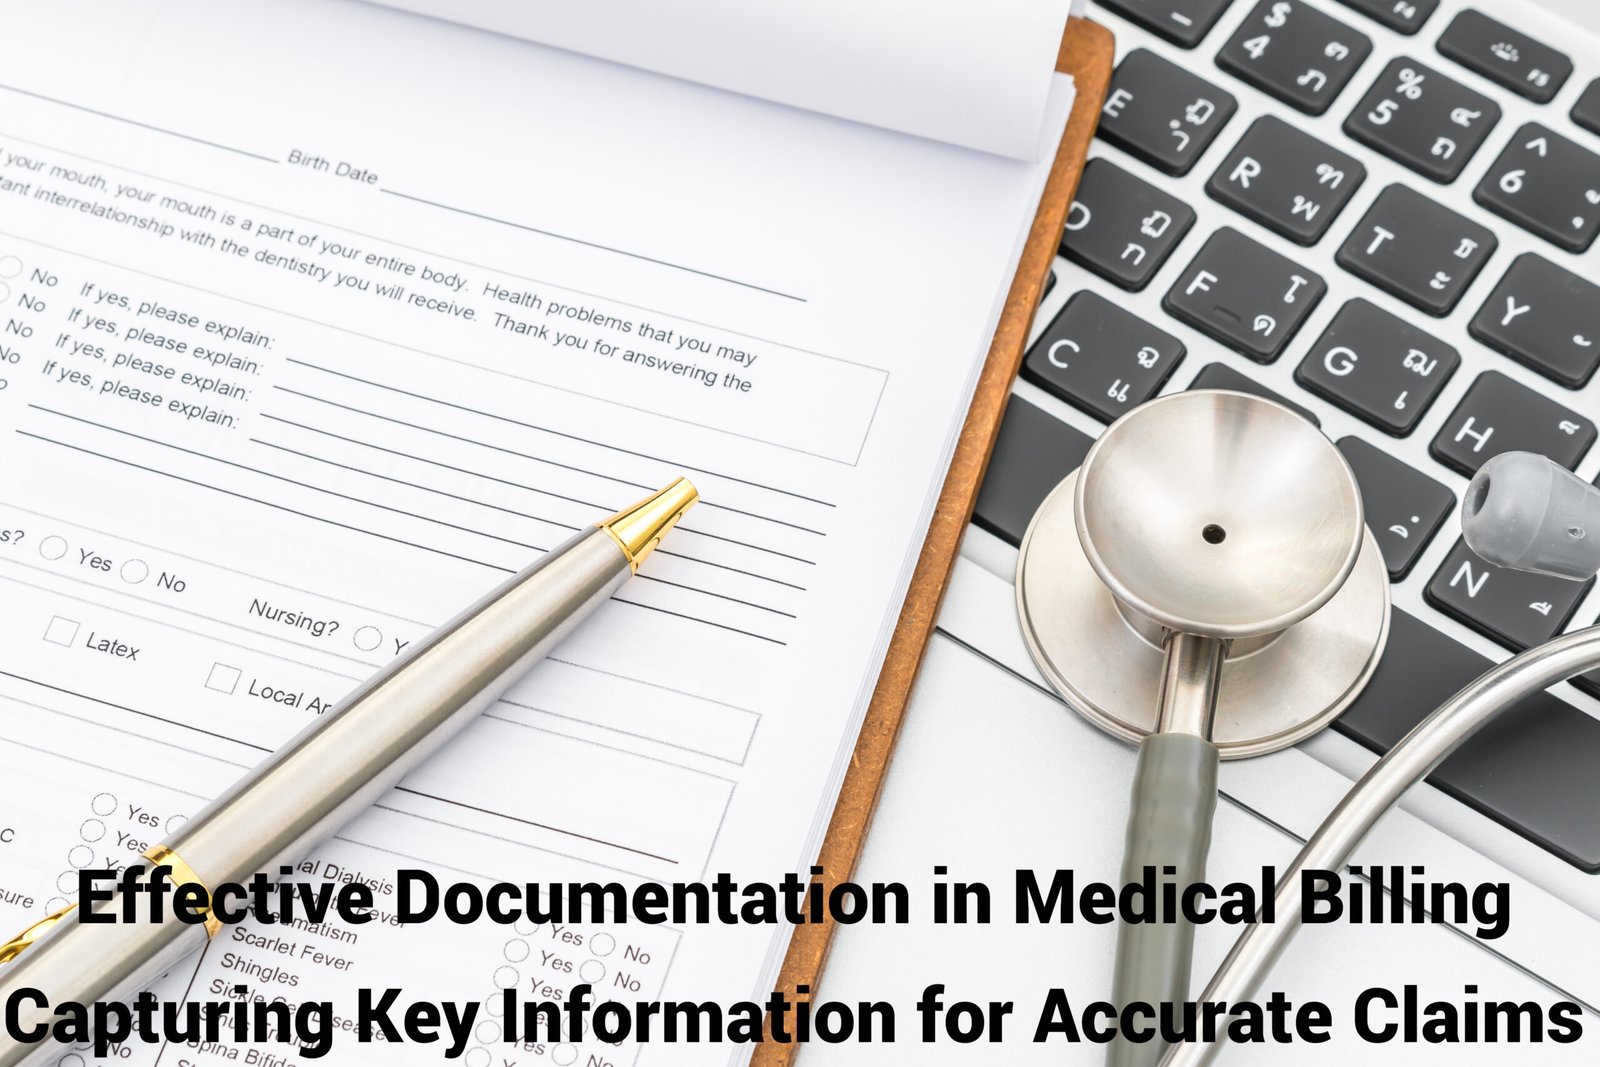 Adequate Documentation in Medical Billing: Capturing Key Information for Accurate Claims